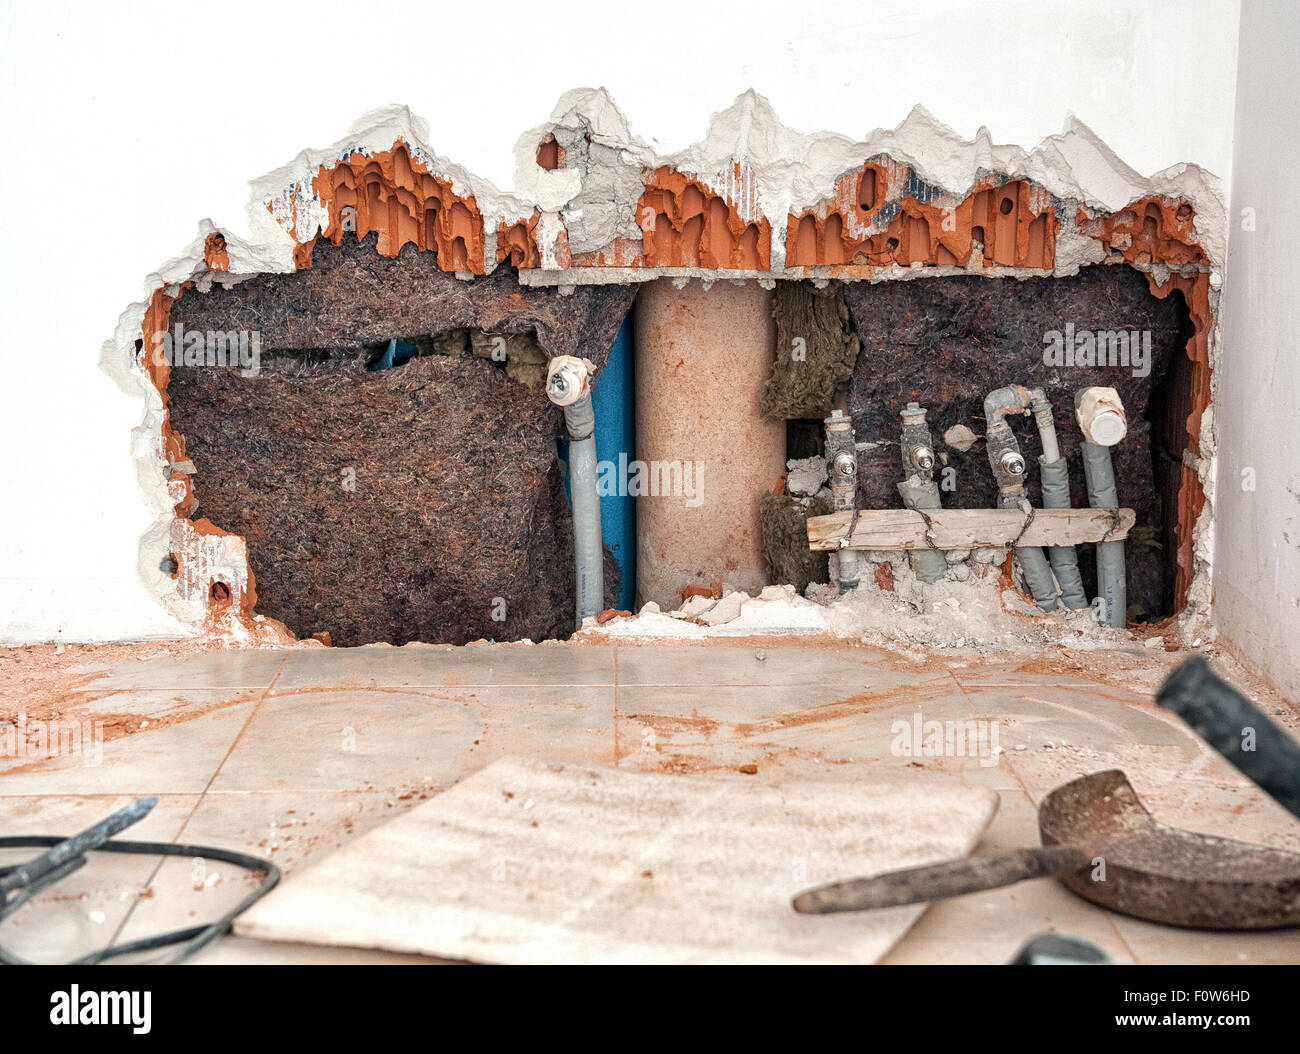 Renovation project in a building Stock Photo